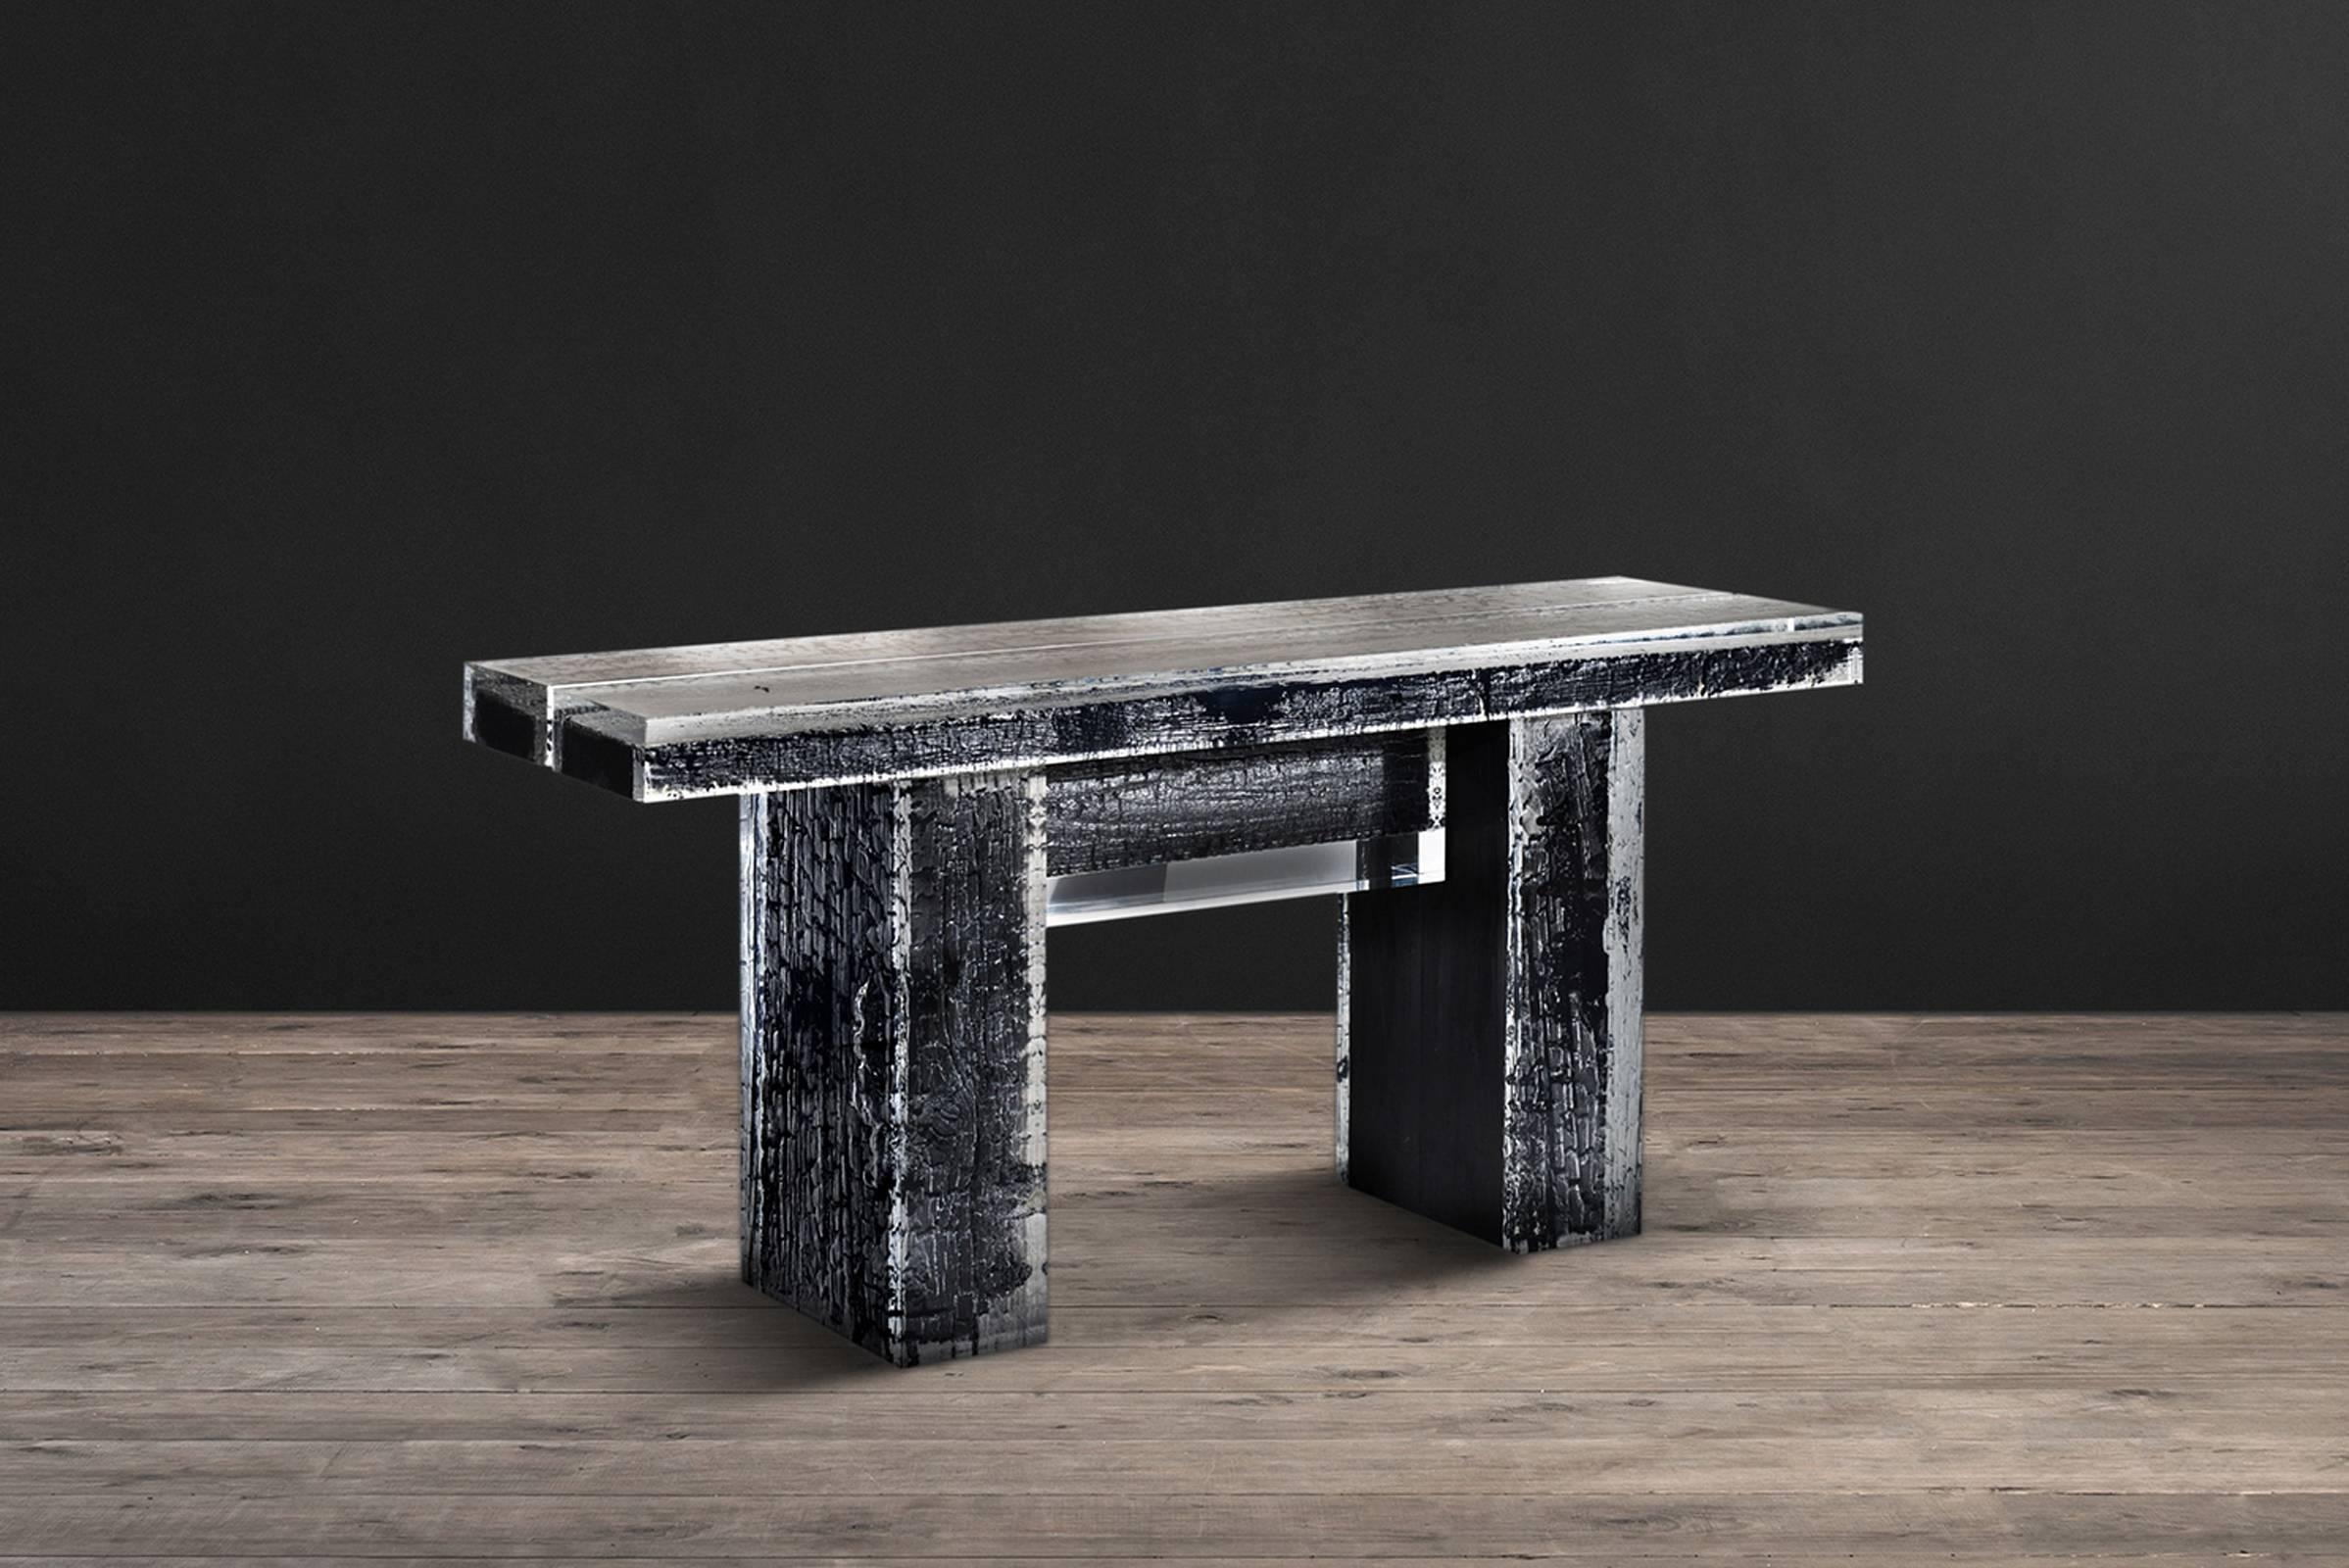 Console table Ice Burnt with burnt timber in crystalline 
acrylic. Ice-cold smooth appearance contrasts with 
Charred rugged timber. Table features four beams 
of timber encased in acrylic, set atop two large 
timbers also in acrylic. The